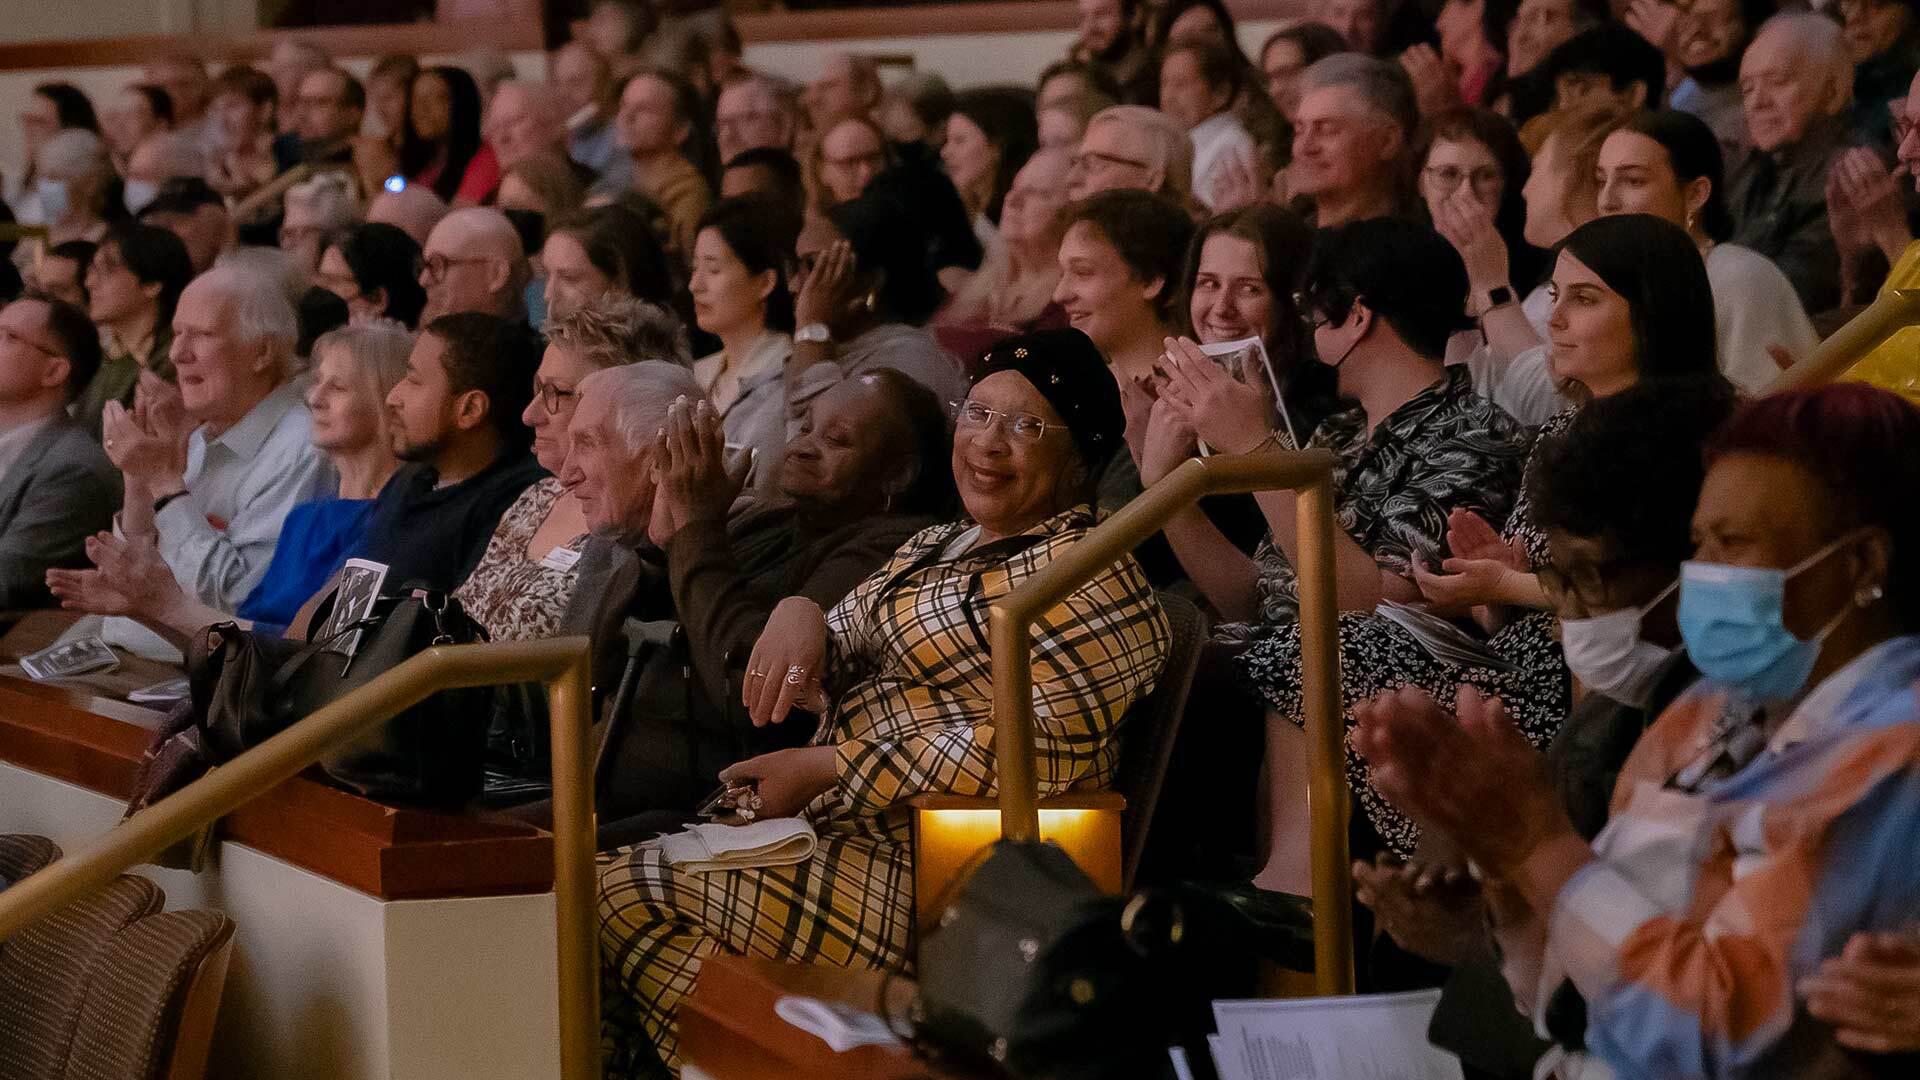 People sit happily in audience at a concert